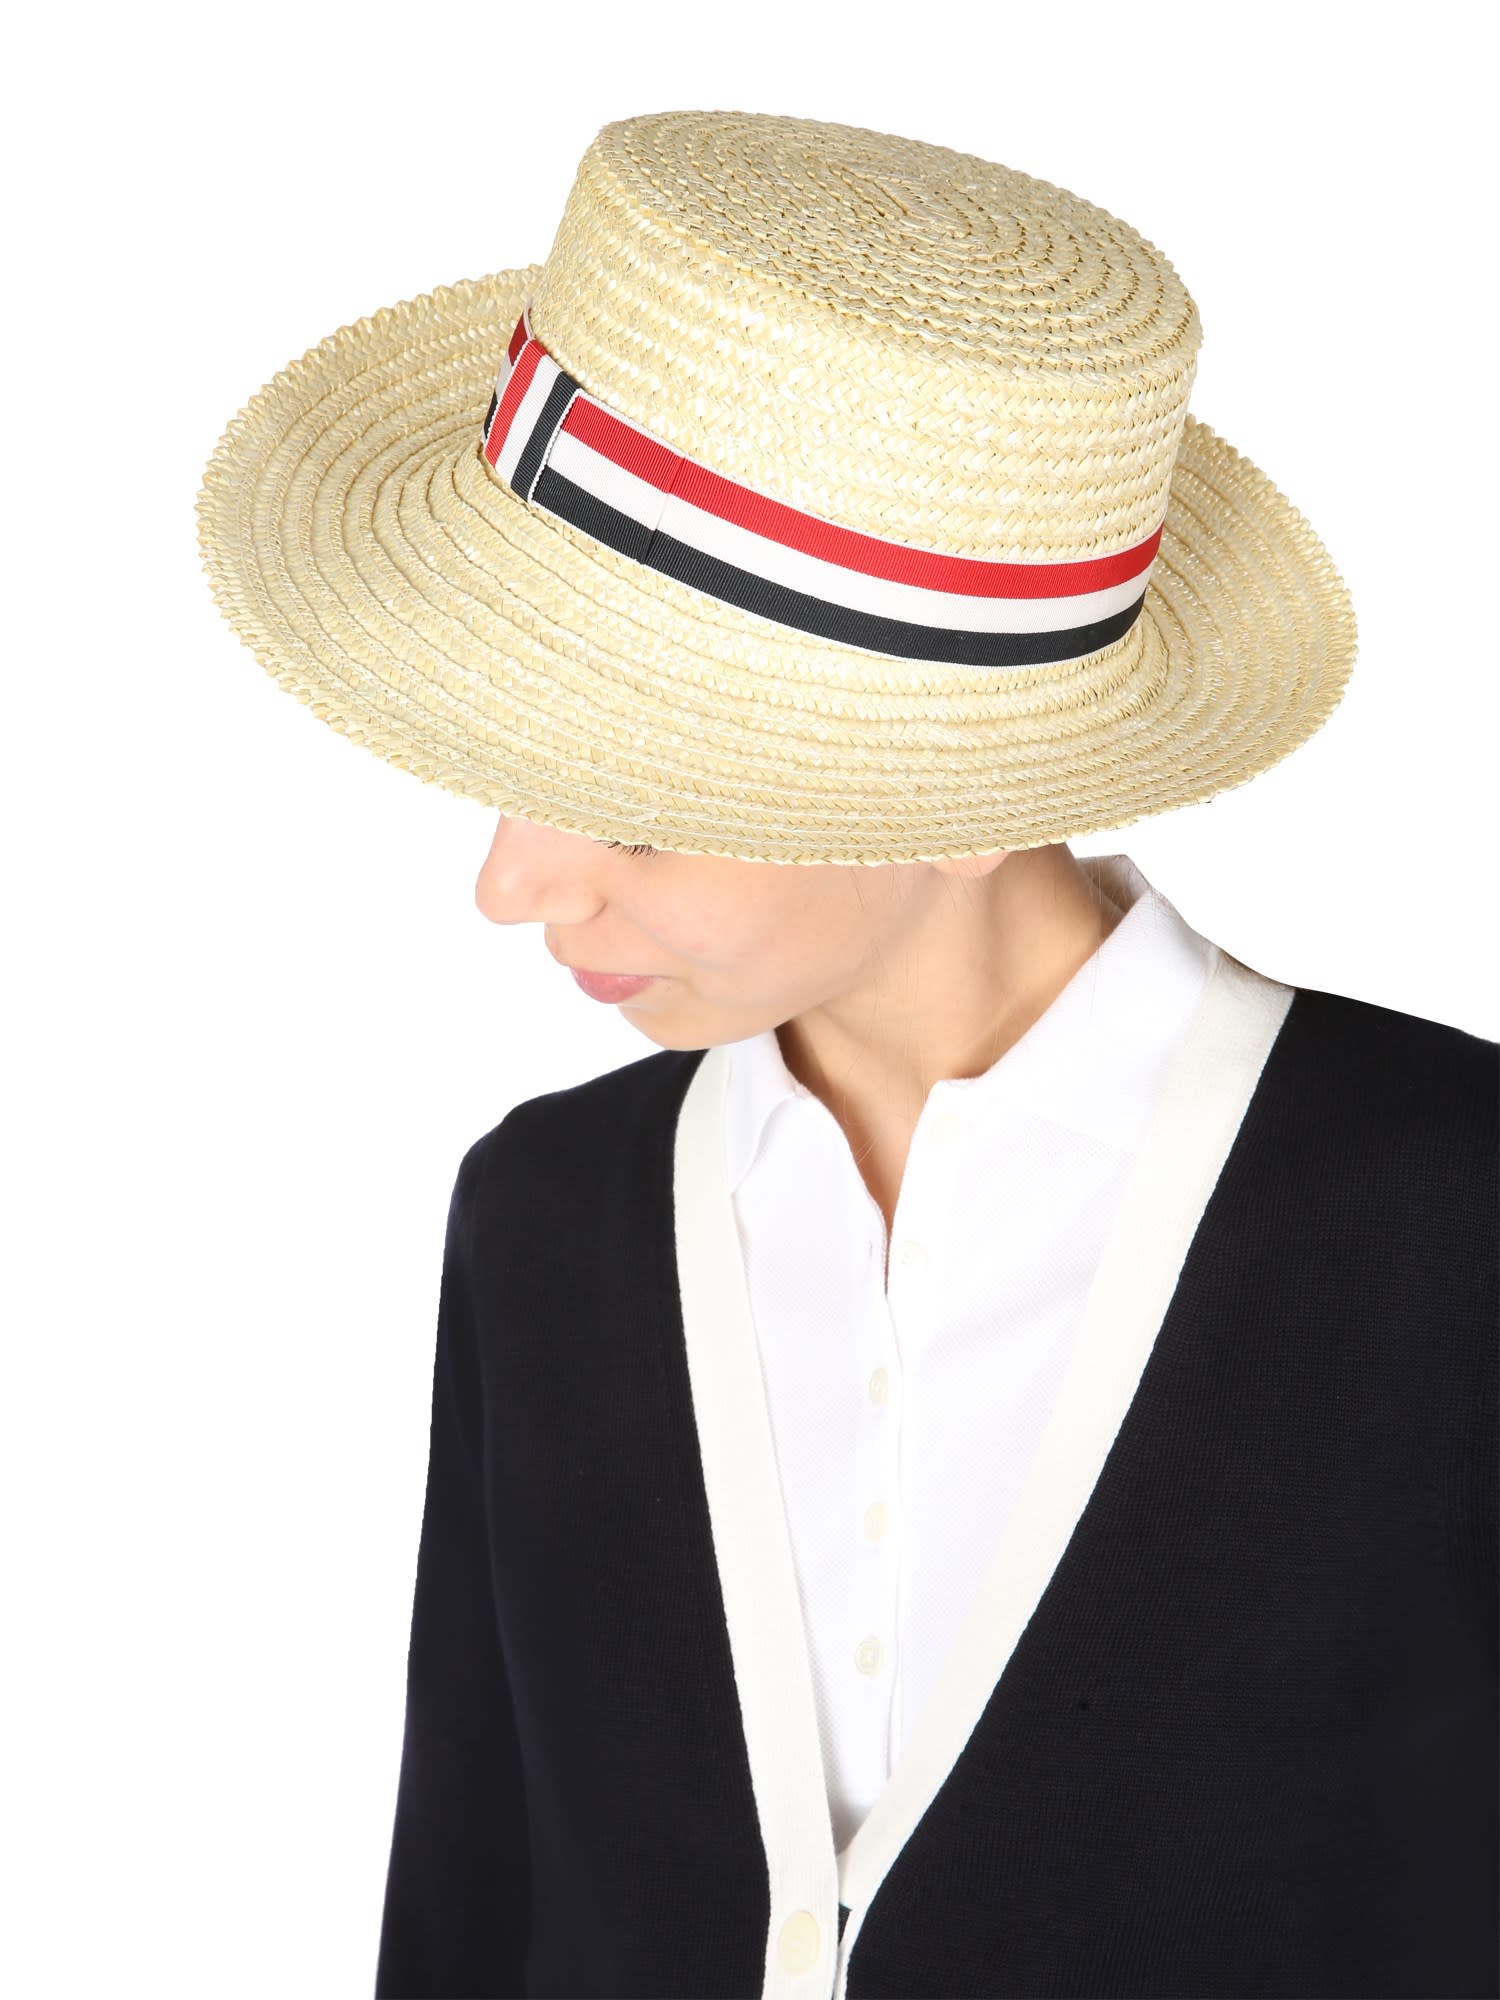 Thom Browne Boater Hat